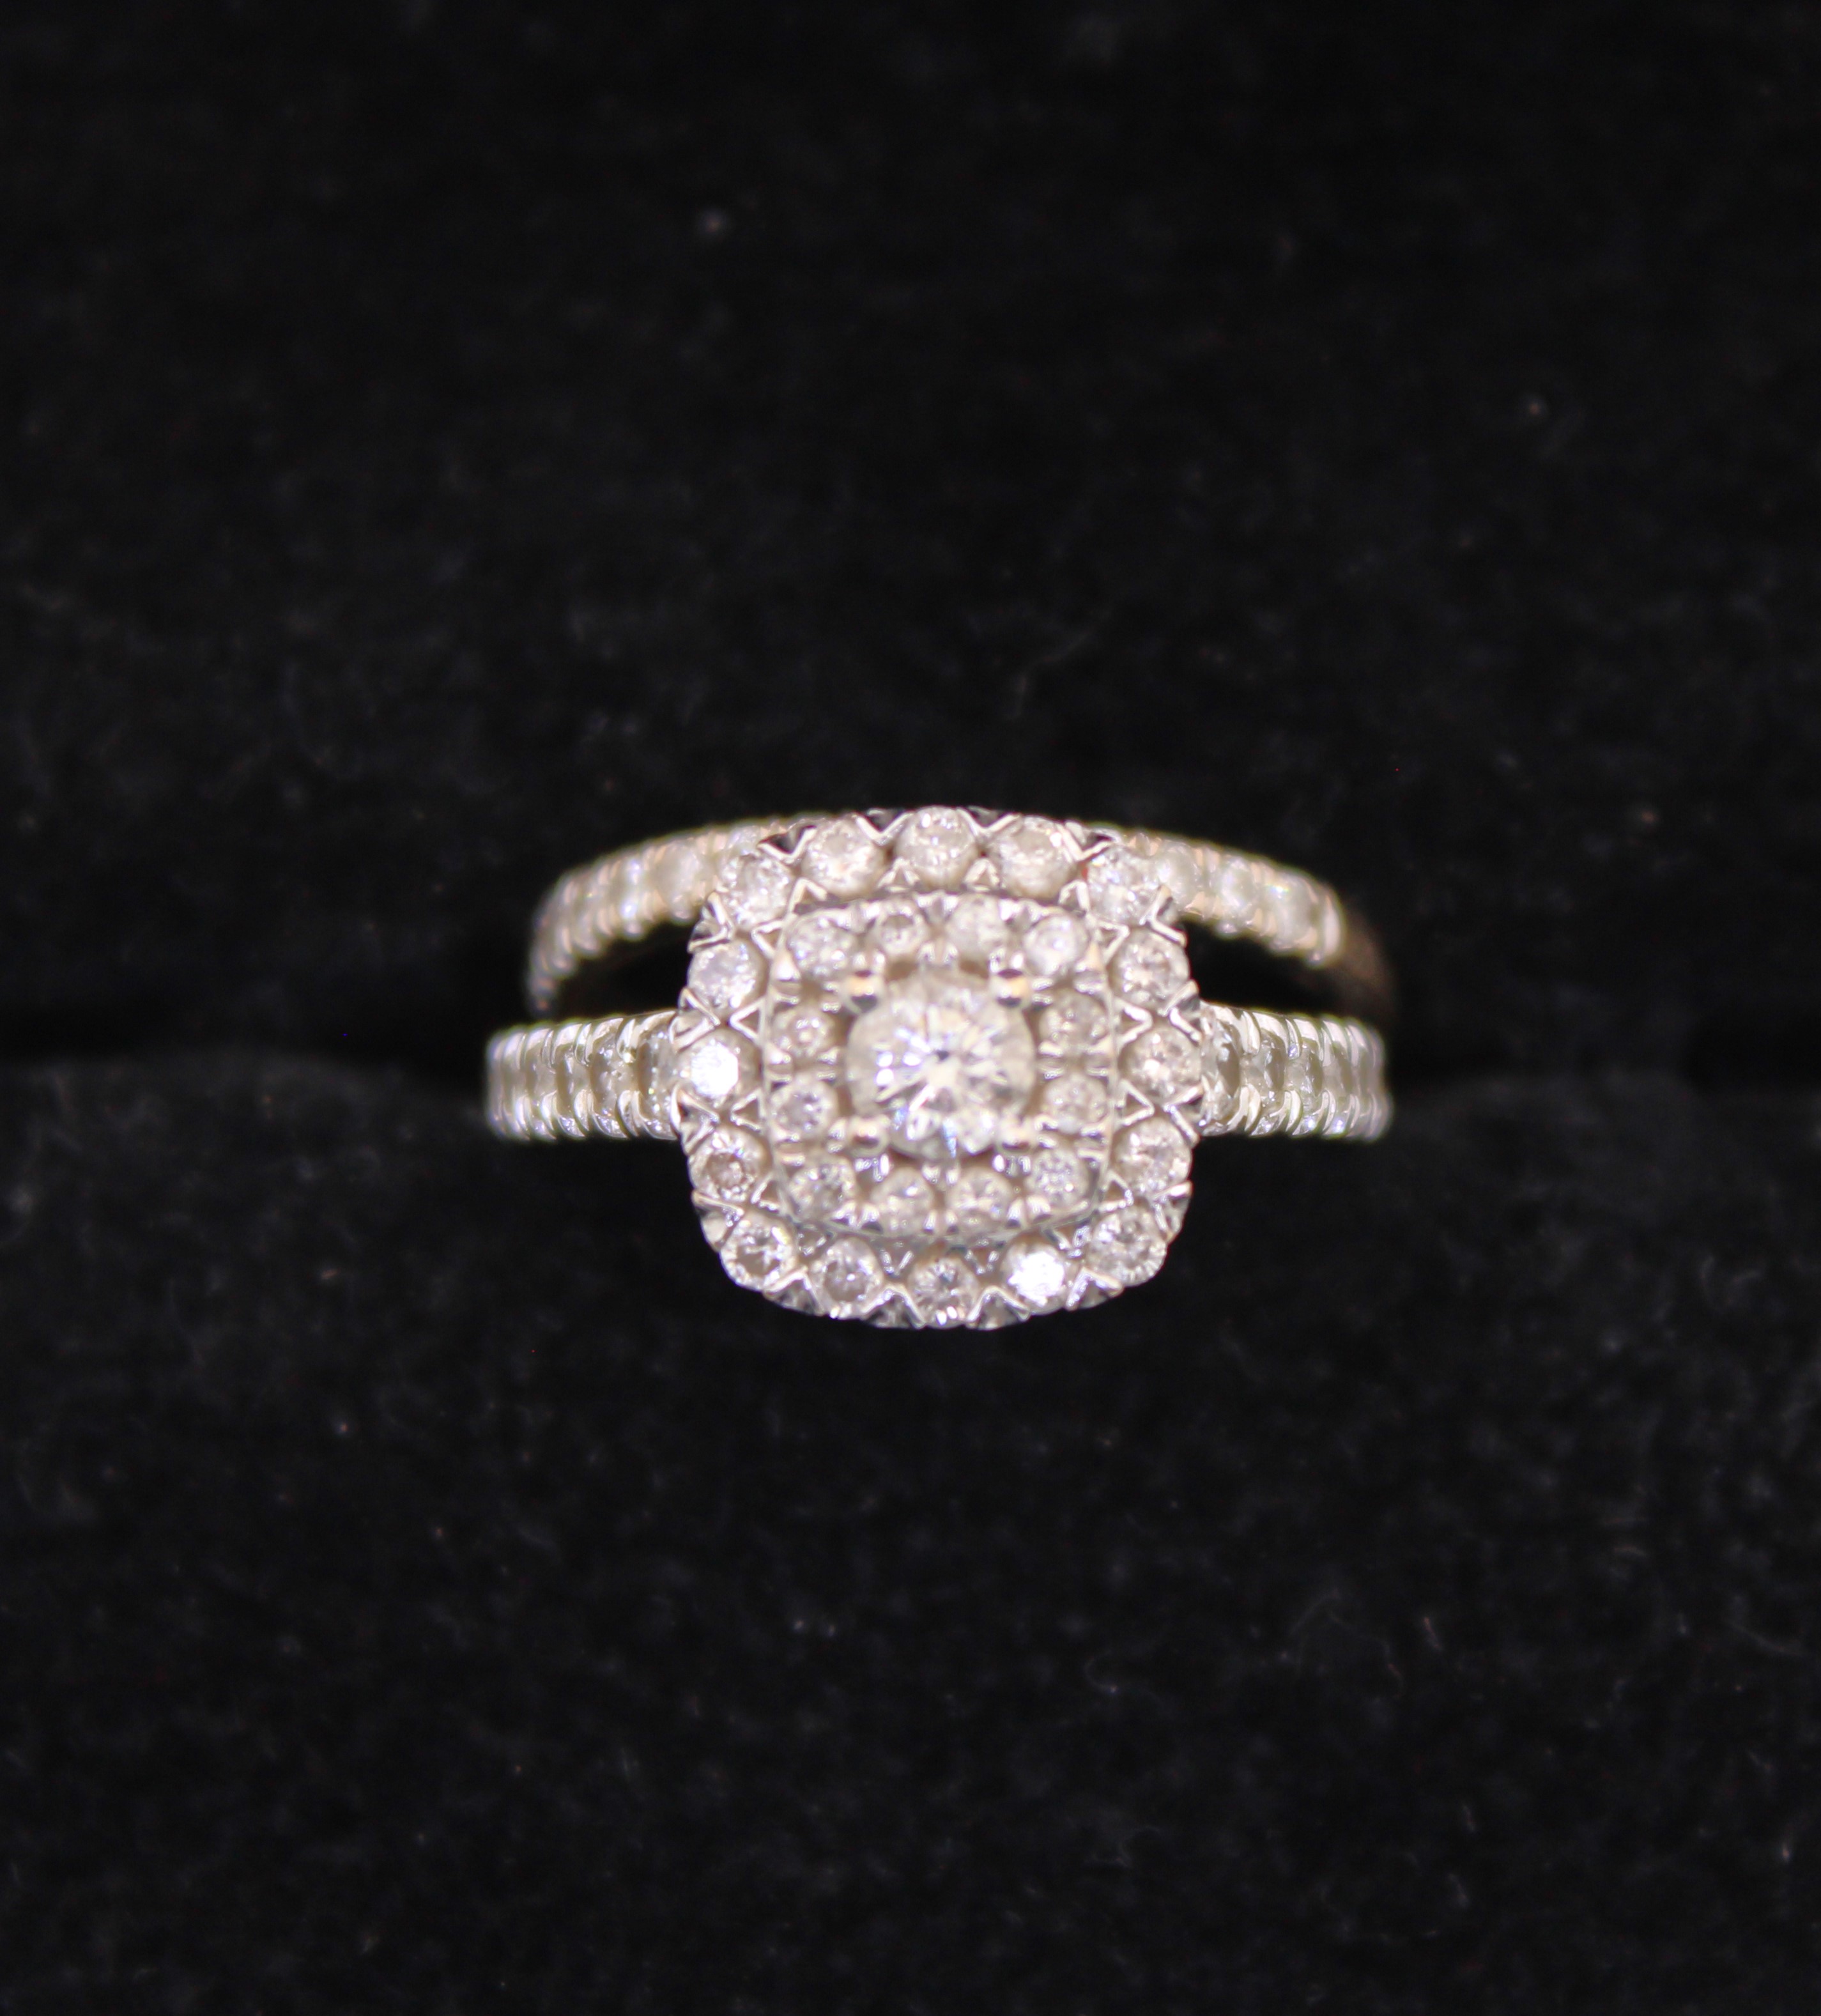 18ct White Gold Halo Design Round Brilliant Cut Diamond Bridal Set rings approx. 1ct Total.  The